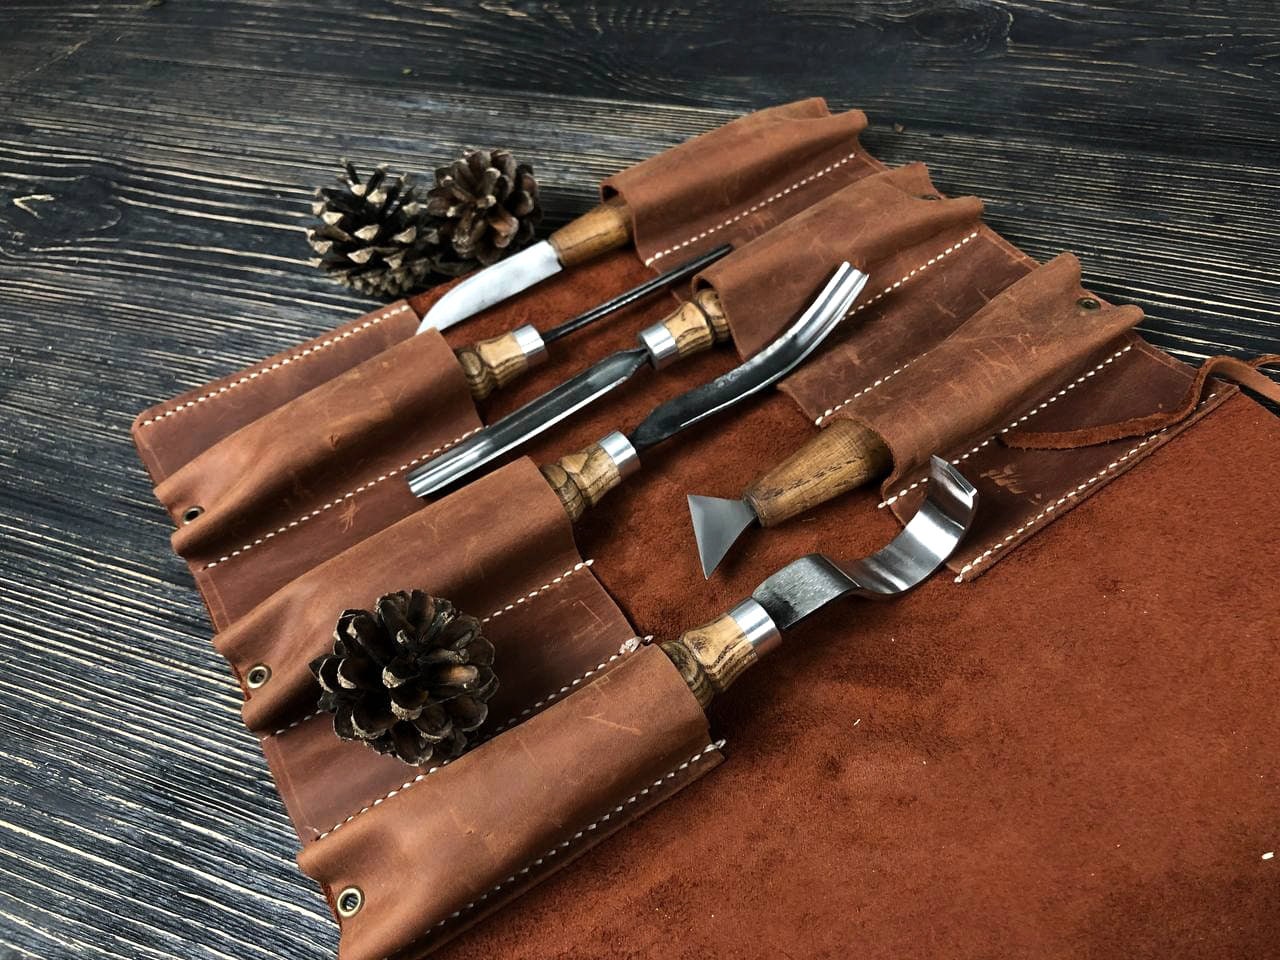 OWDEN Leather Carving Tool Set – OWDEN CRAFT